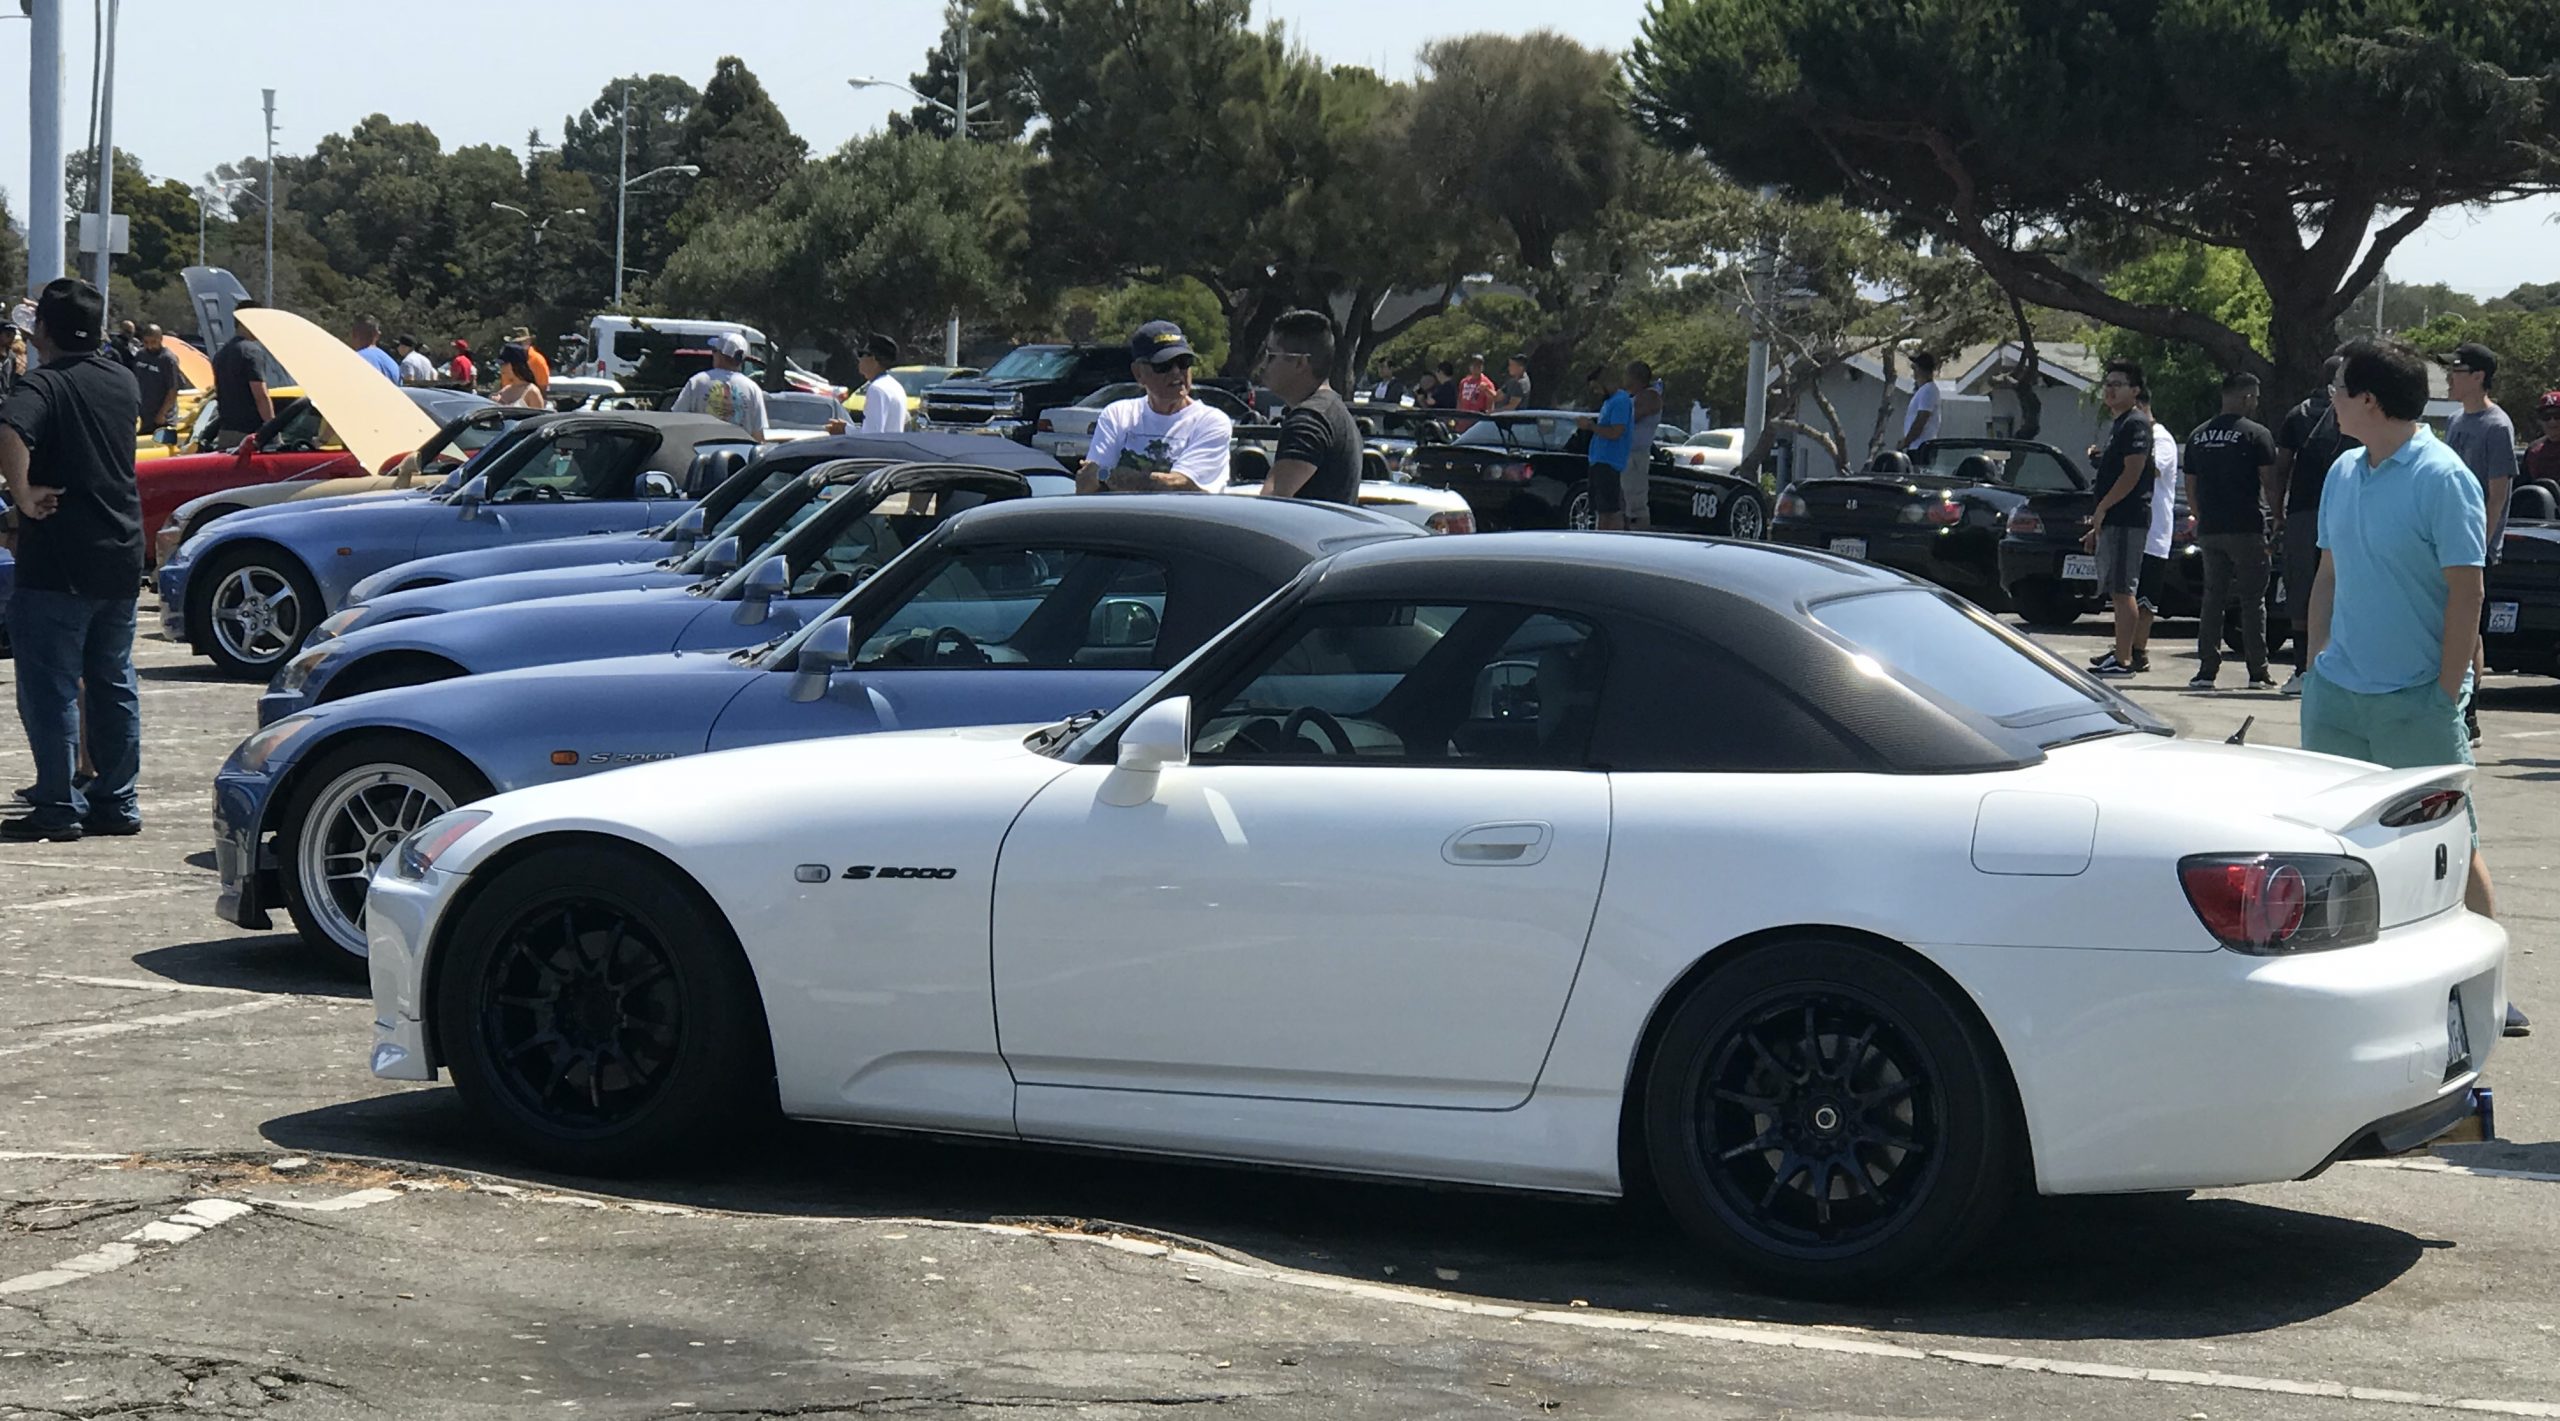 A row of lowered Honda S2000s